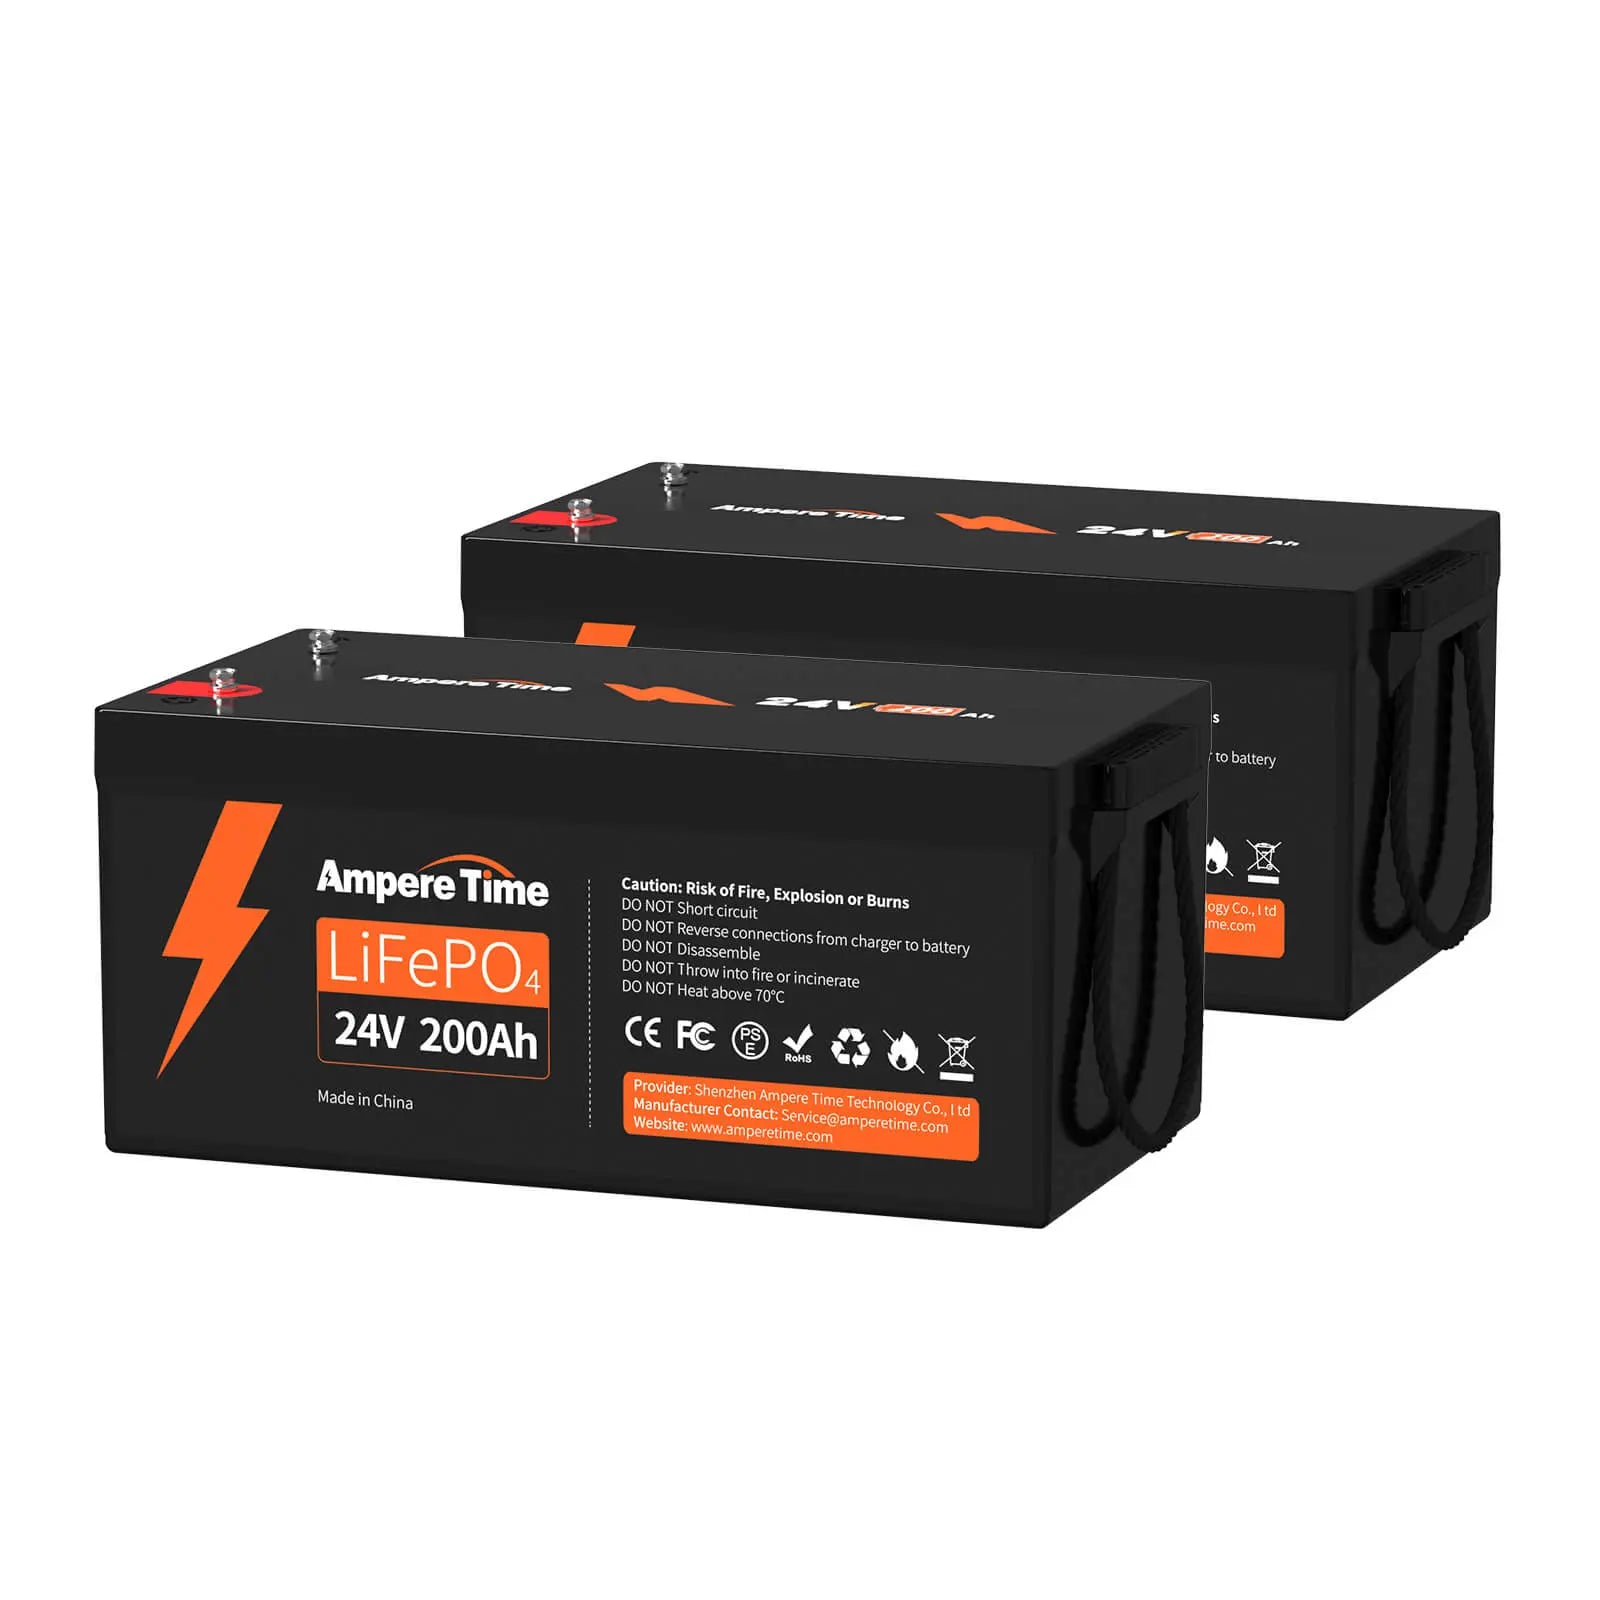 Ampere Time 24V 200Ah, 5120Wh Lithium LiFePO4 Battery & Built in 200A BMS Ampere Time